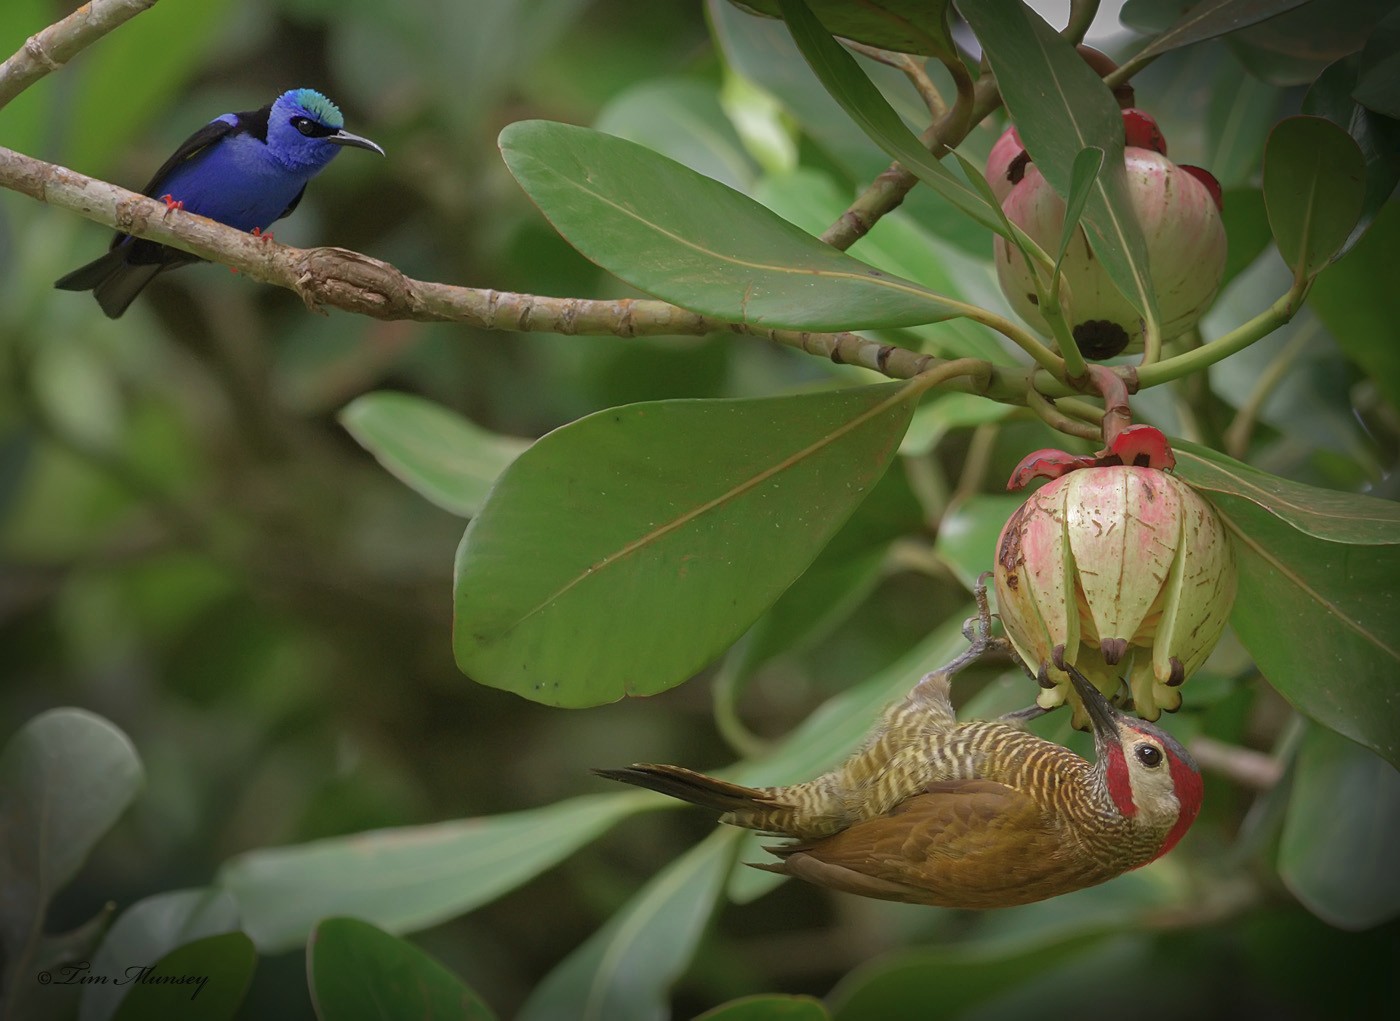 Golden-olive Woopecker and Red-legged Honeycreeper